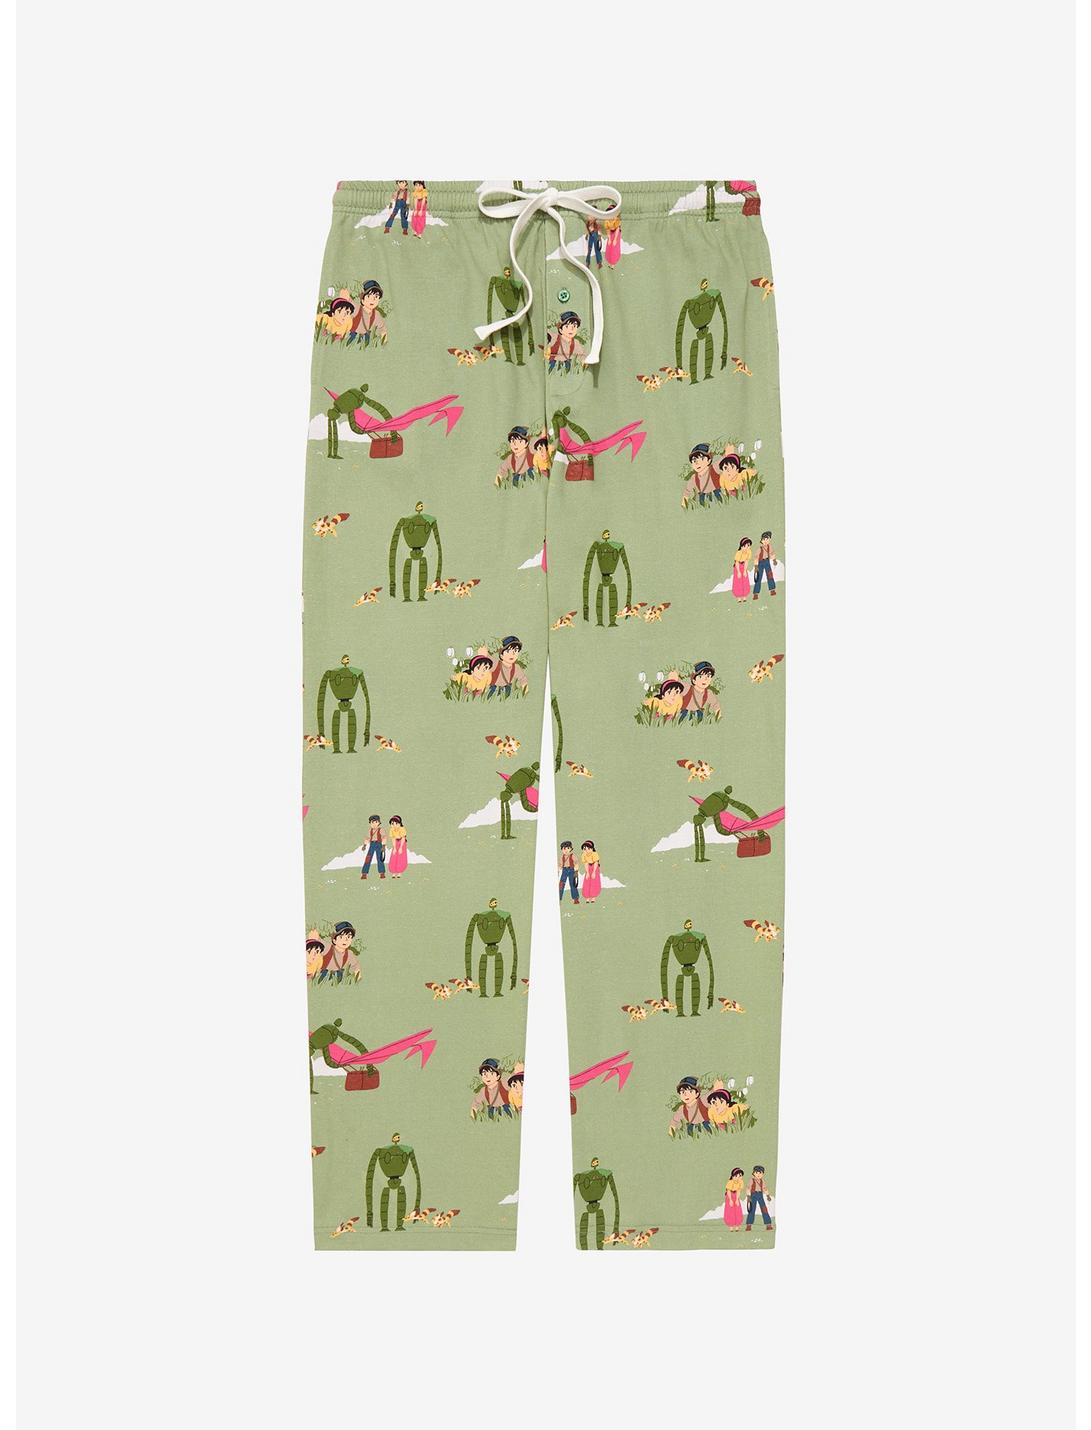 Our Universe Studio Ghibli Castle in the Sky Characters Allover Print Pajama Pants, MULTI, hi-res